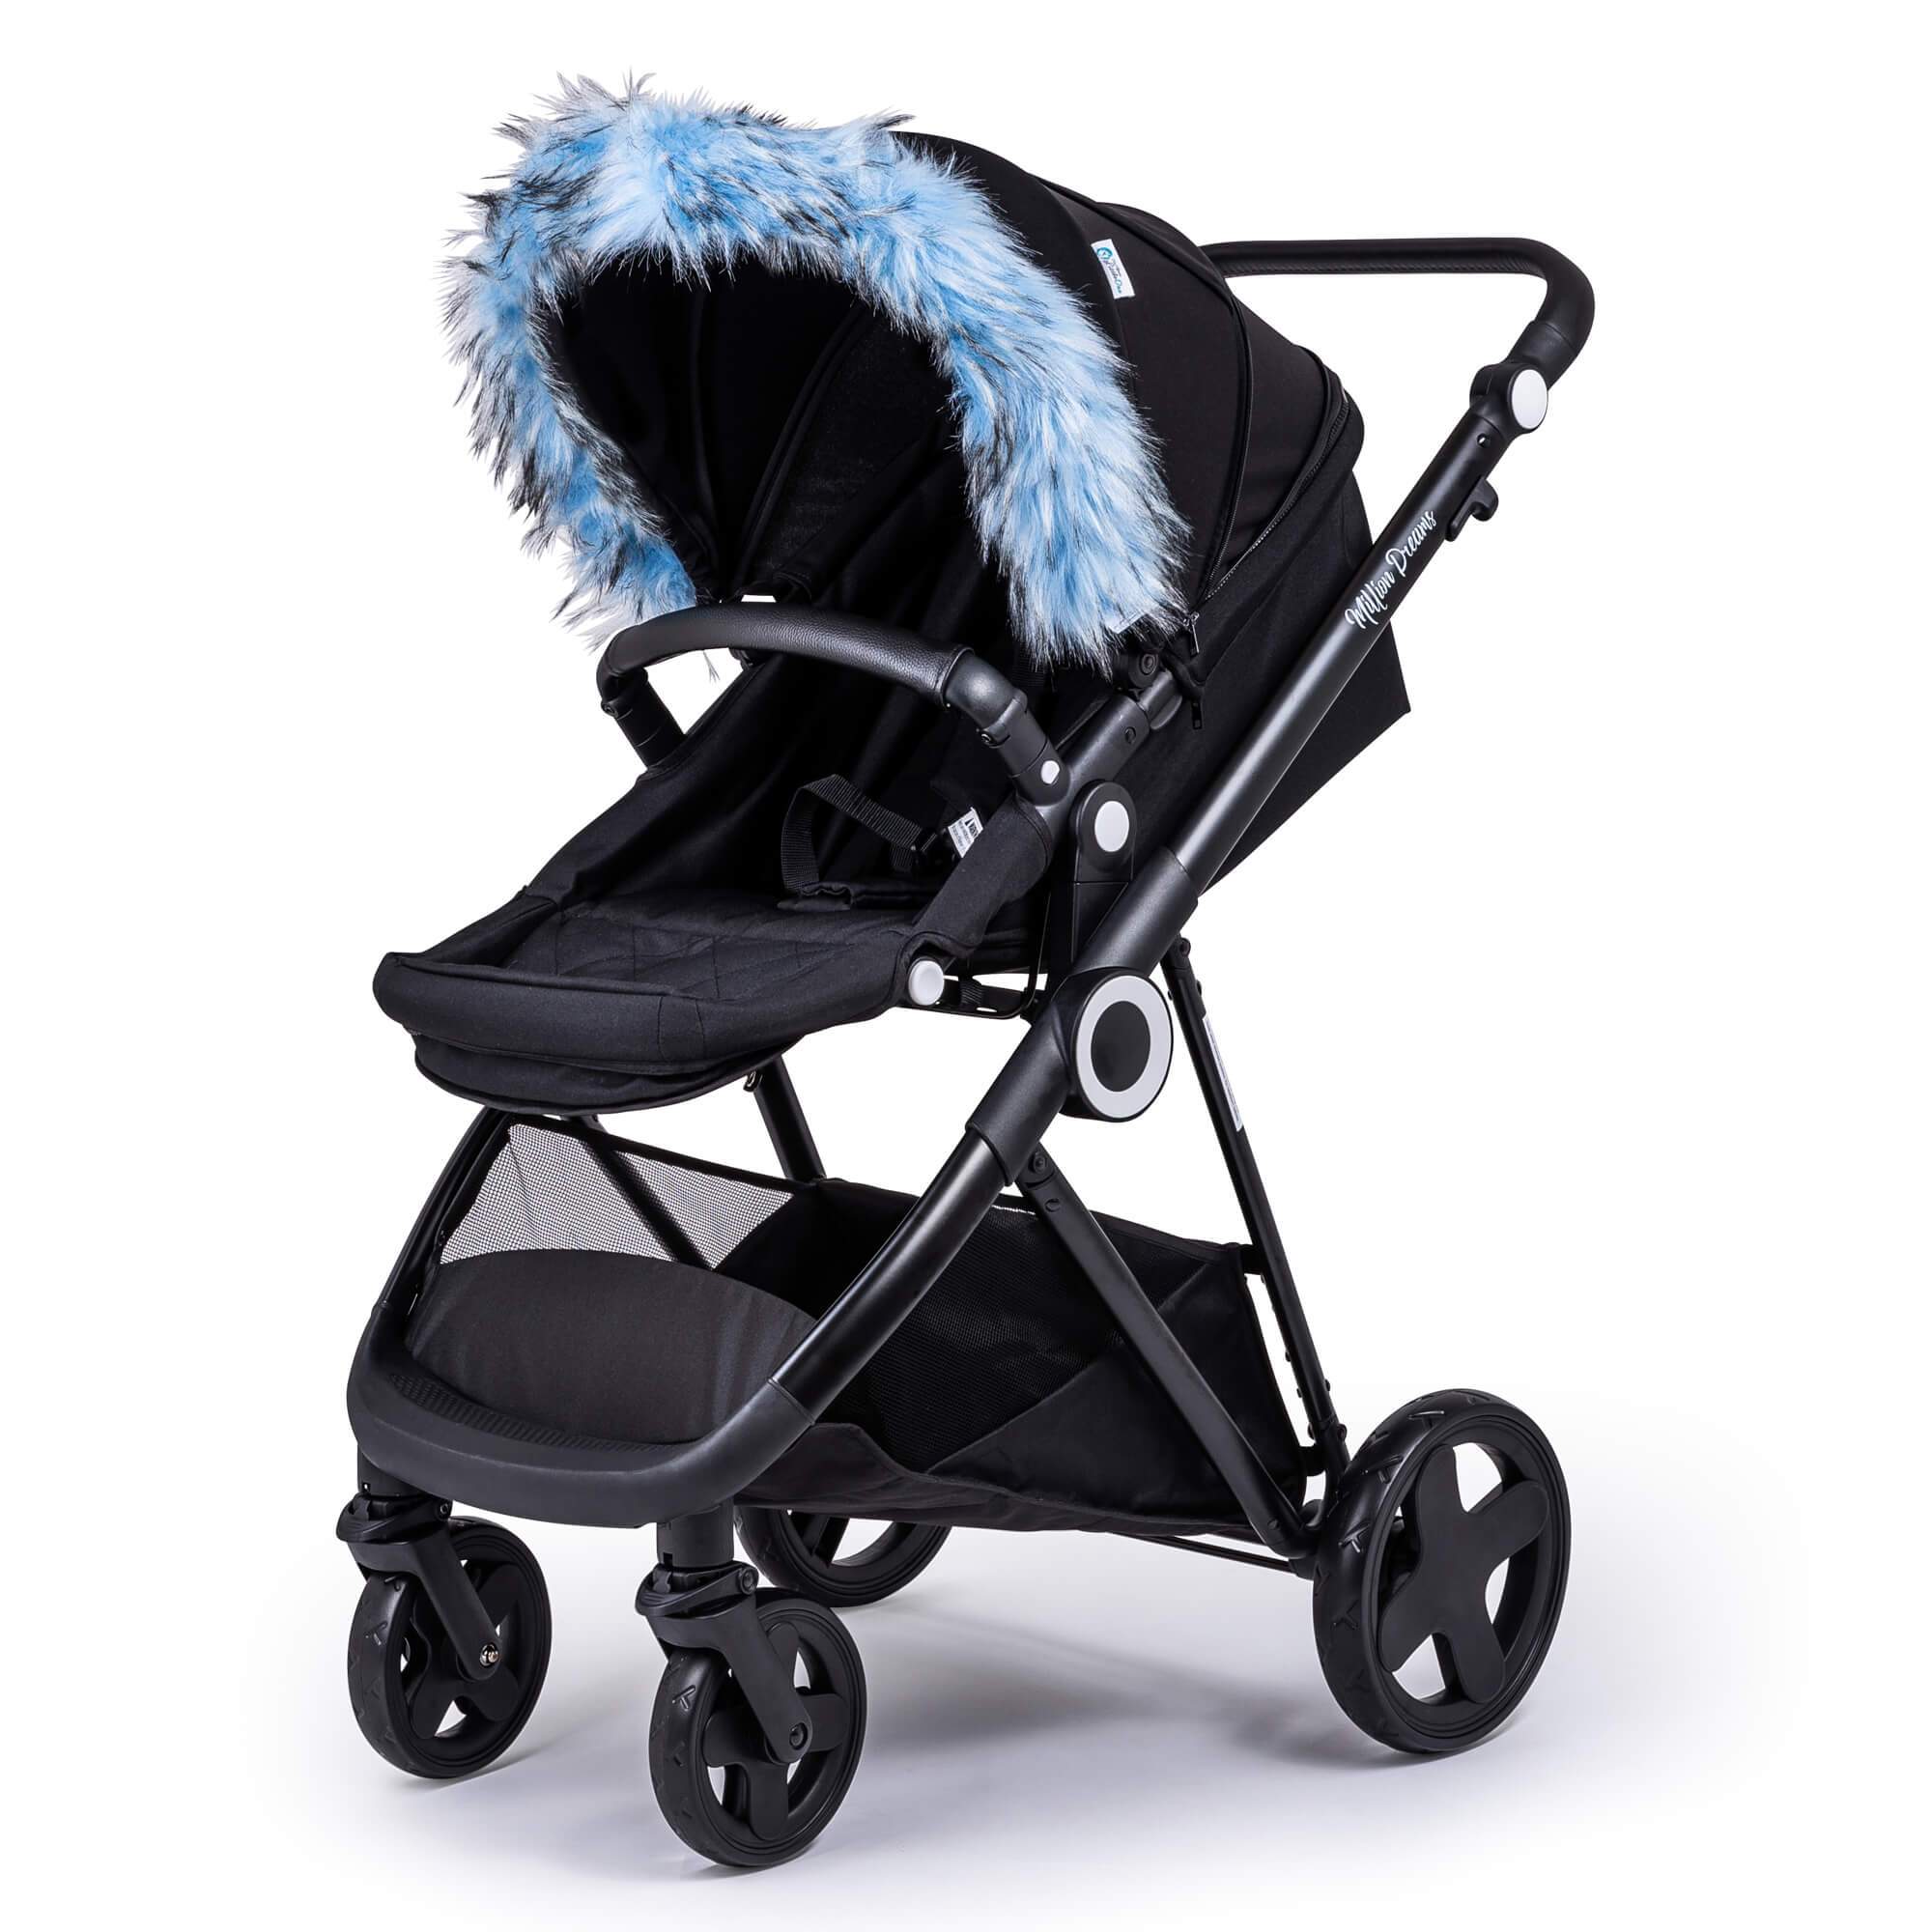 Pram Fur Hood Trim Attachment for Pushchair Compatible with Koelstra - Light Blue / Fits All Models | For Your Little One